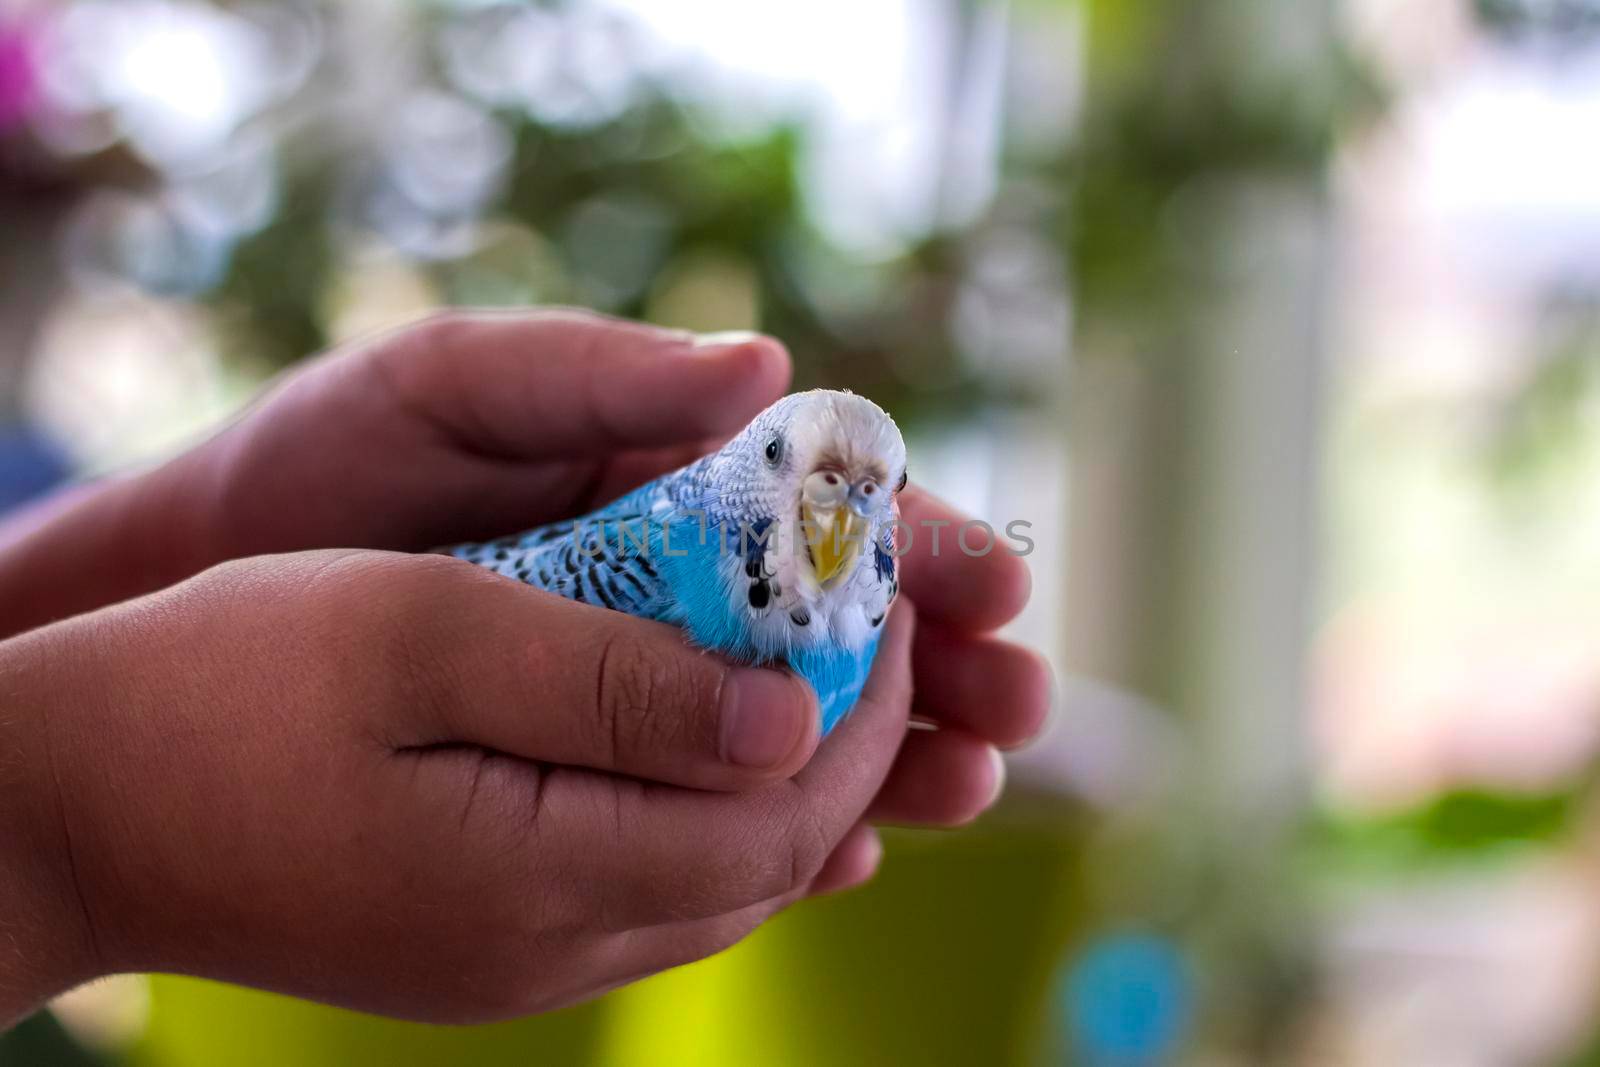 A beautiful blue budgie sits in the child's hand. Tropical birds at home. by Alina_Lebed